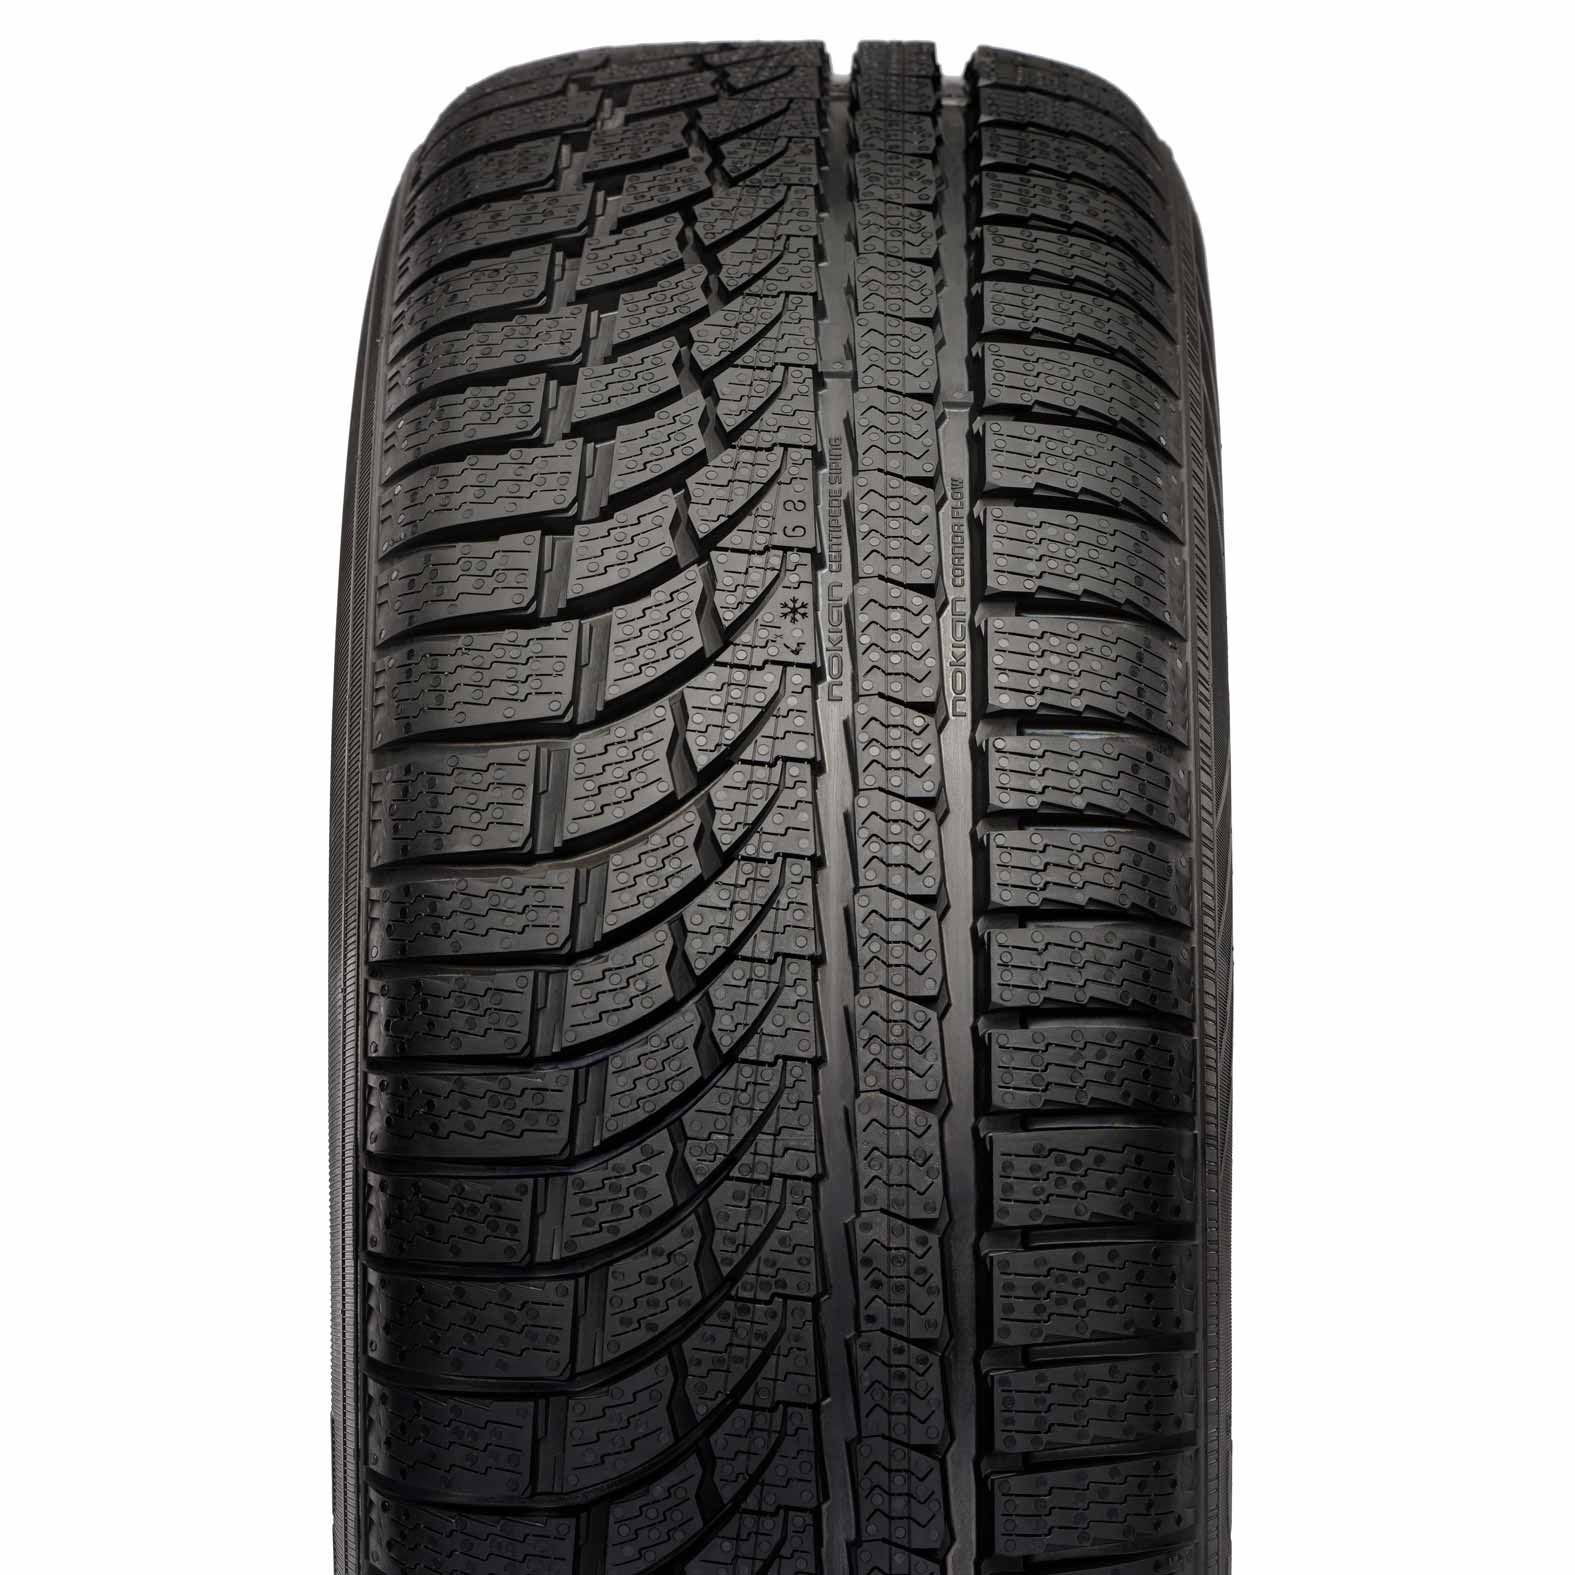 | Nokian for WRG4 Tire Kal Tires All-Weather